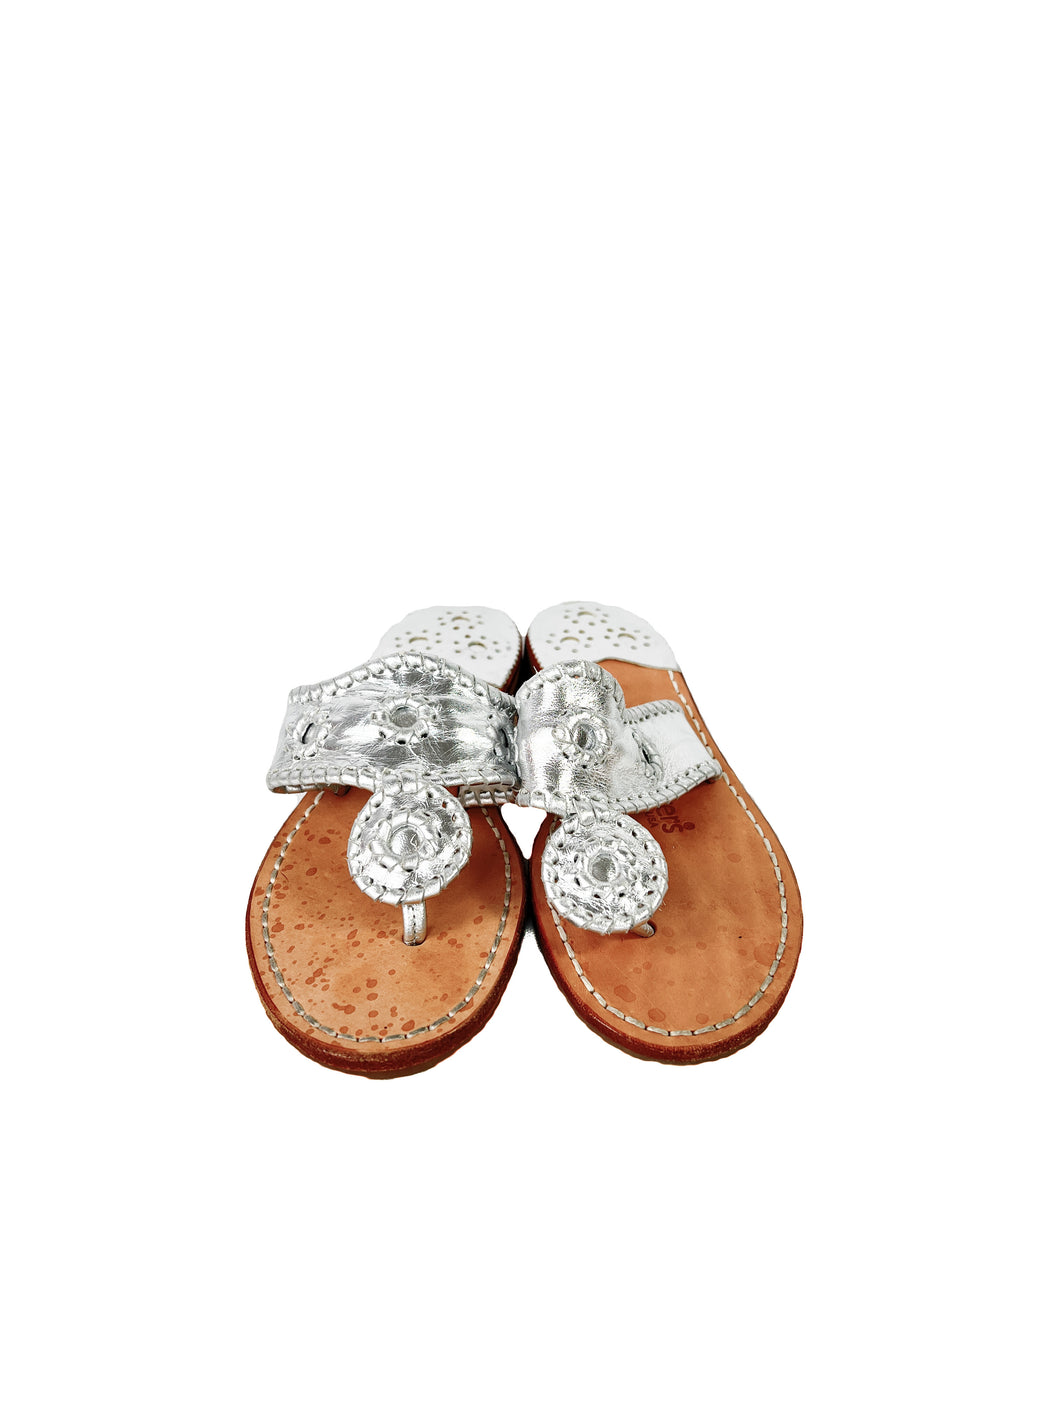 Jack Rogers silver leather flip flops size 6 NEW